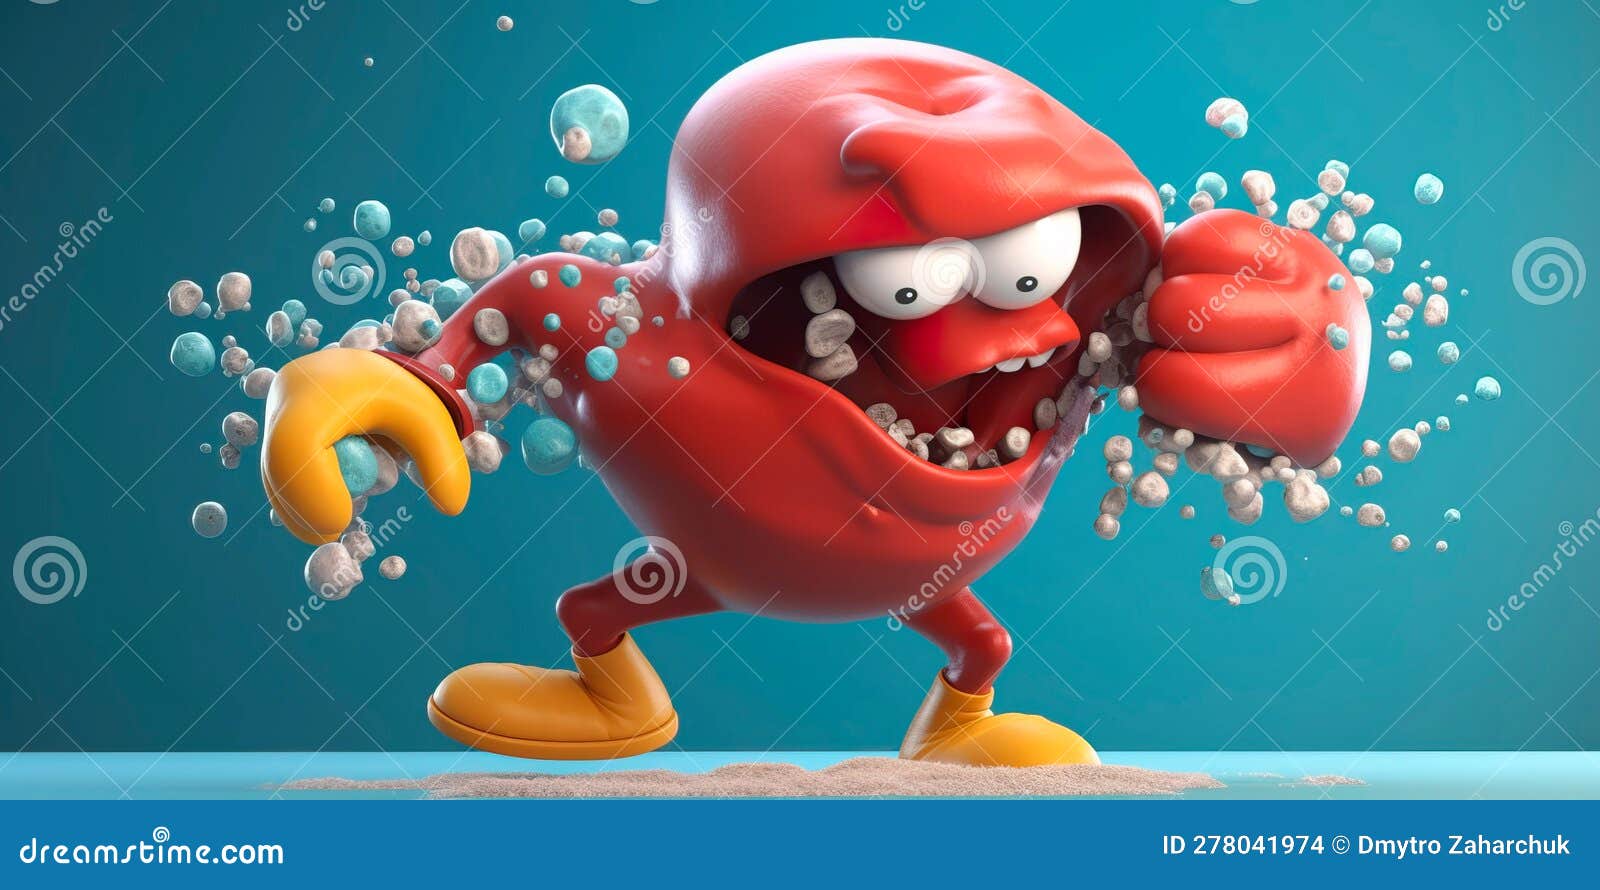 Cartoon Spleen Character with a Superhero Costume, Flexing Its Muscles ...